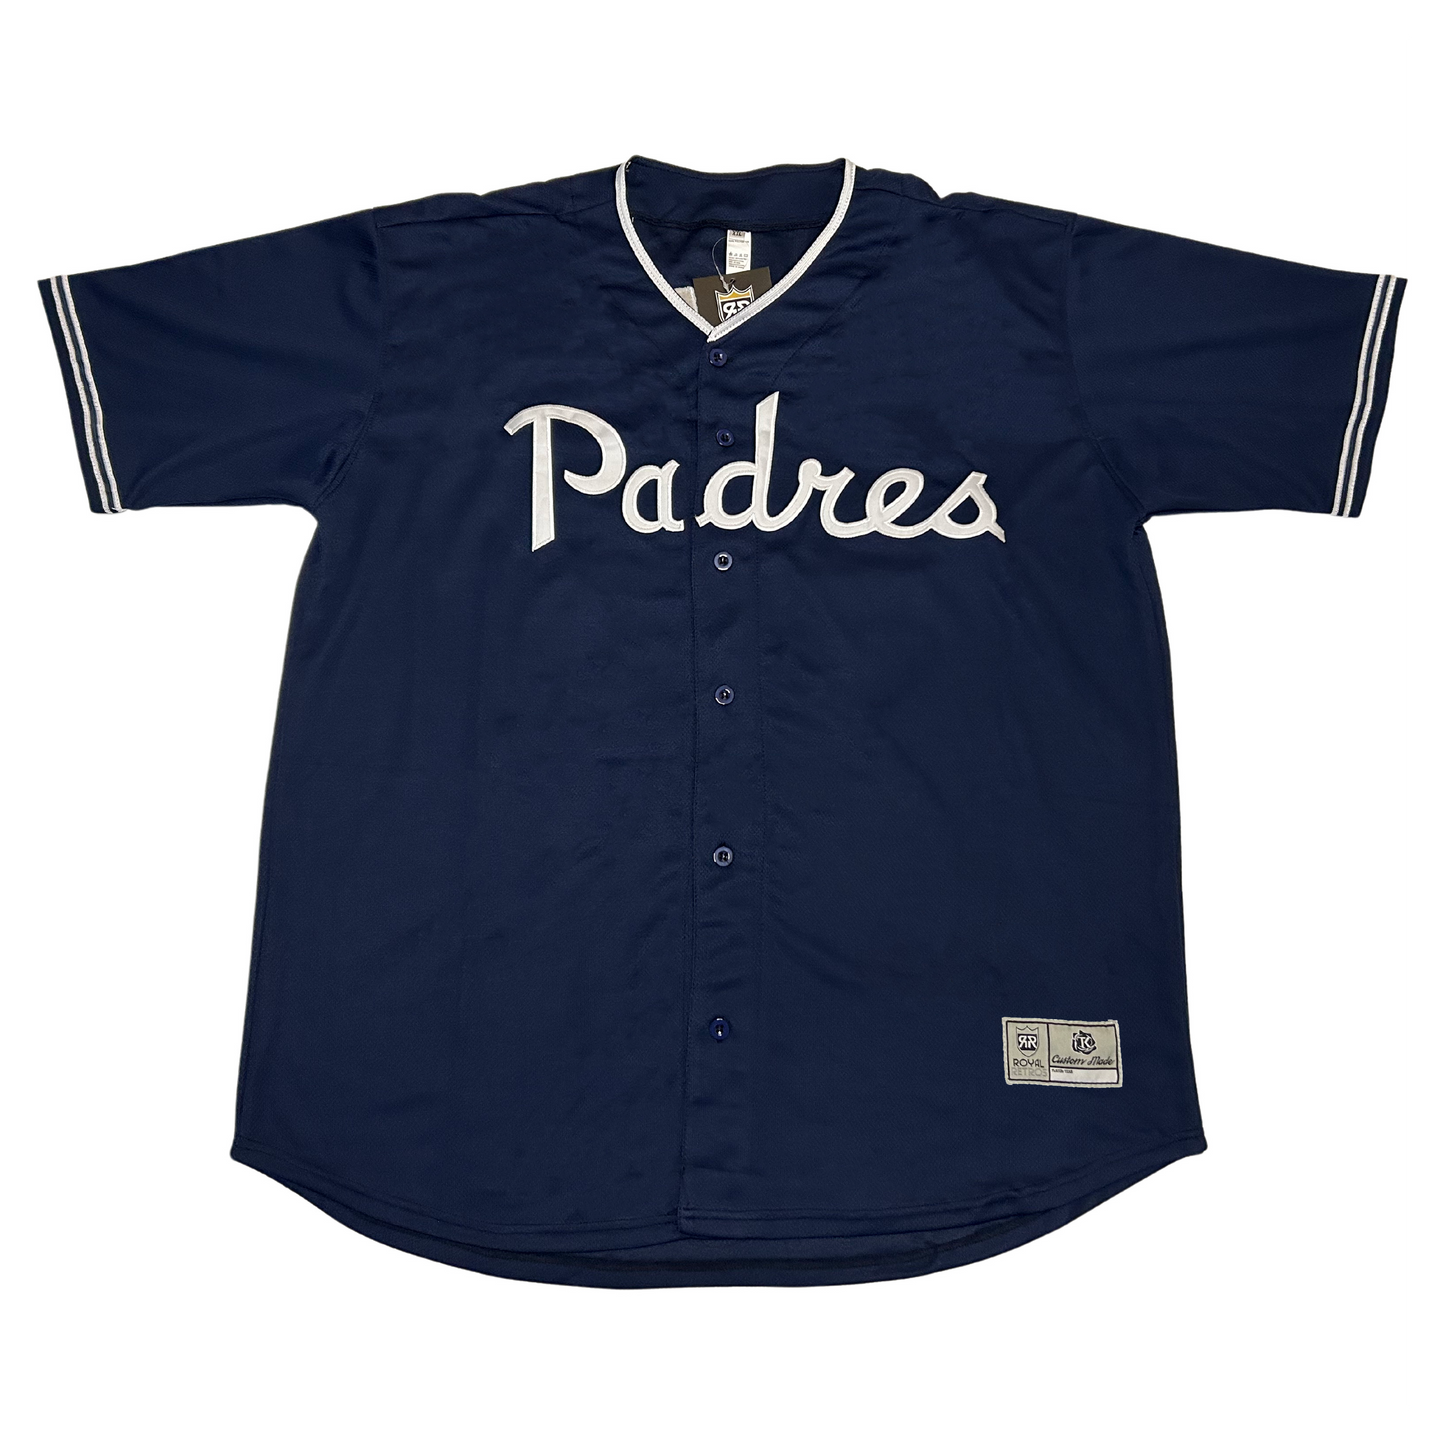 My Padres jersey collection as of right now😎 : r/Padres